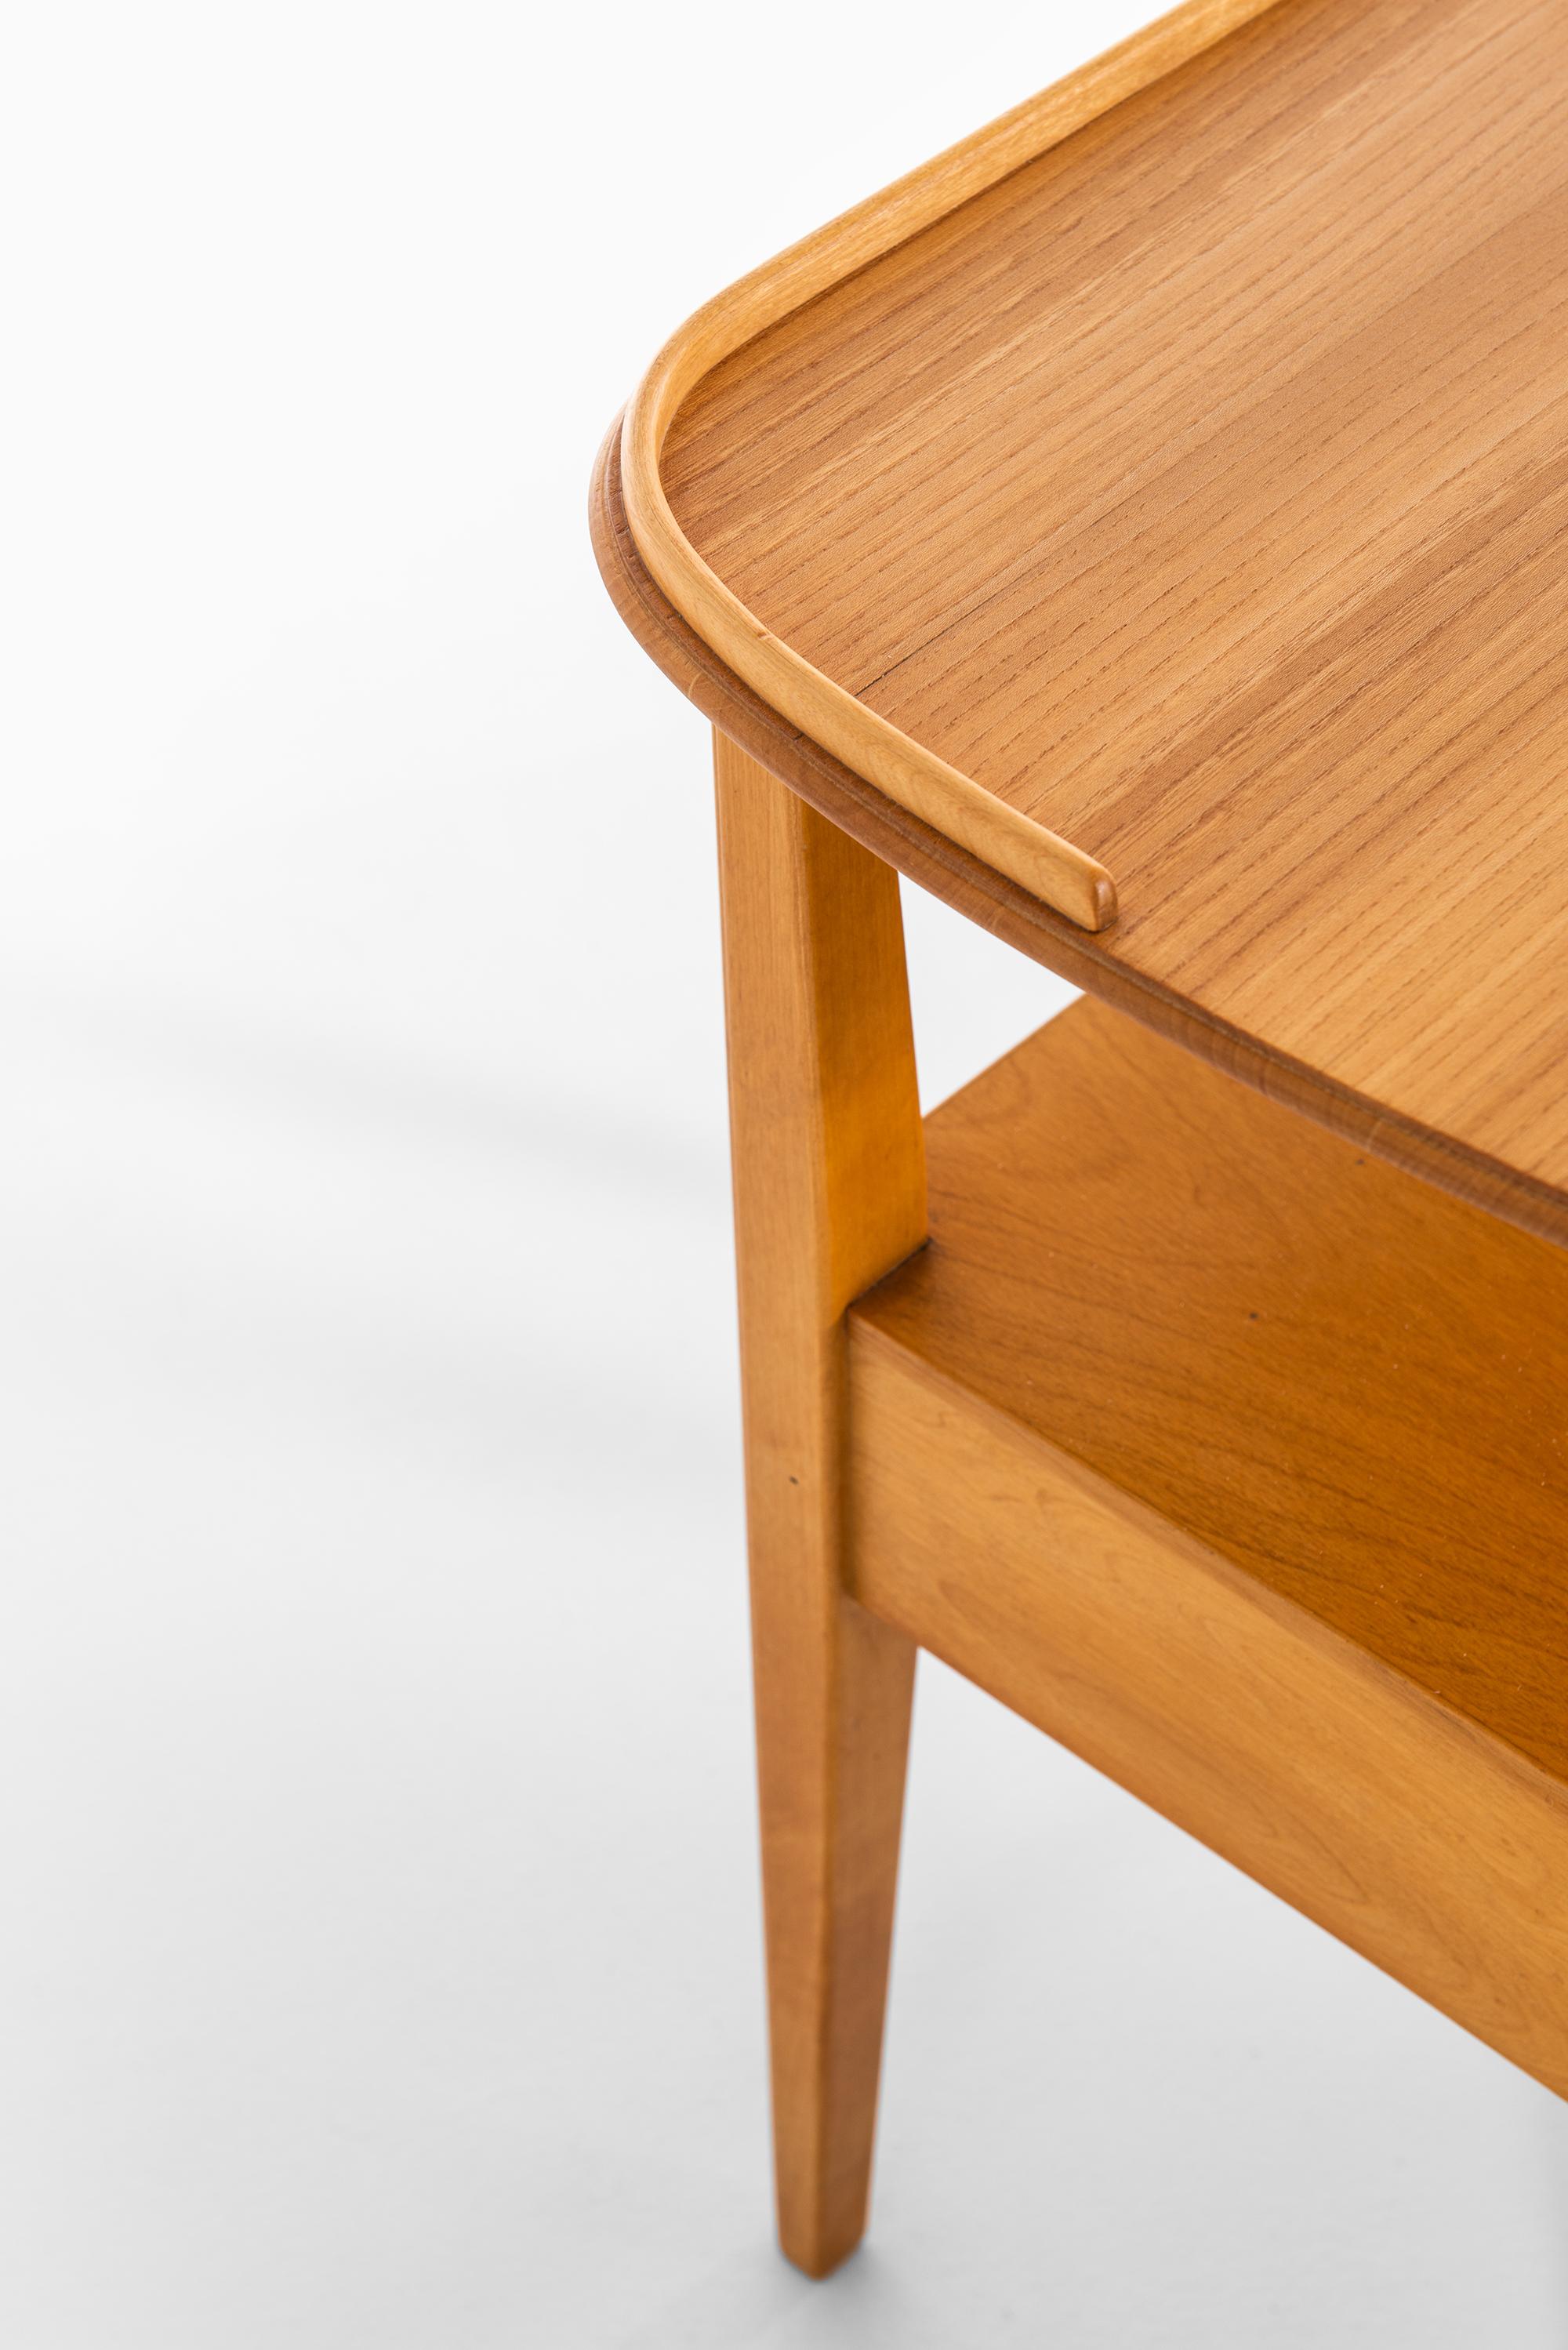 A pair of bedside tables / side tables. Produced by NK (Nordiska Kompaniet) in Sweden.